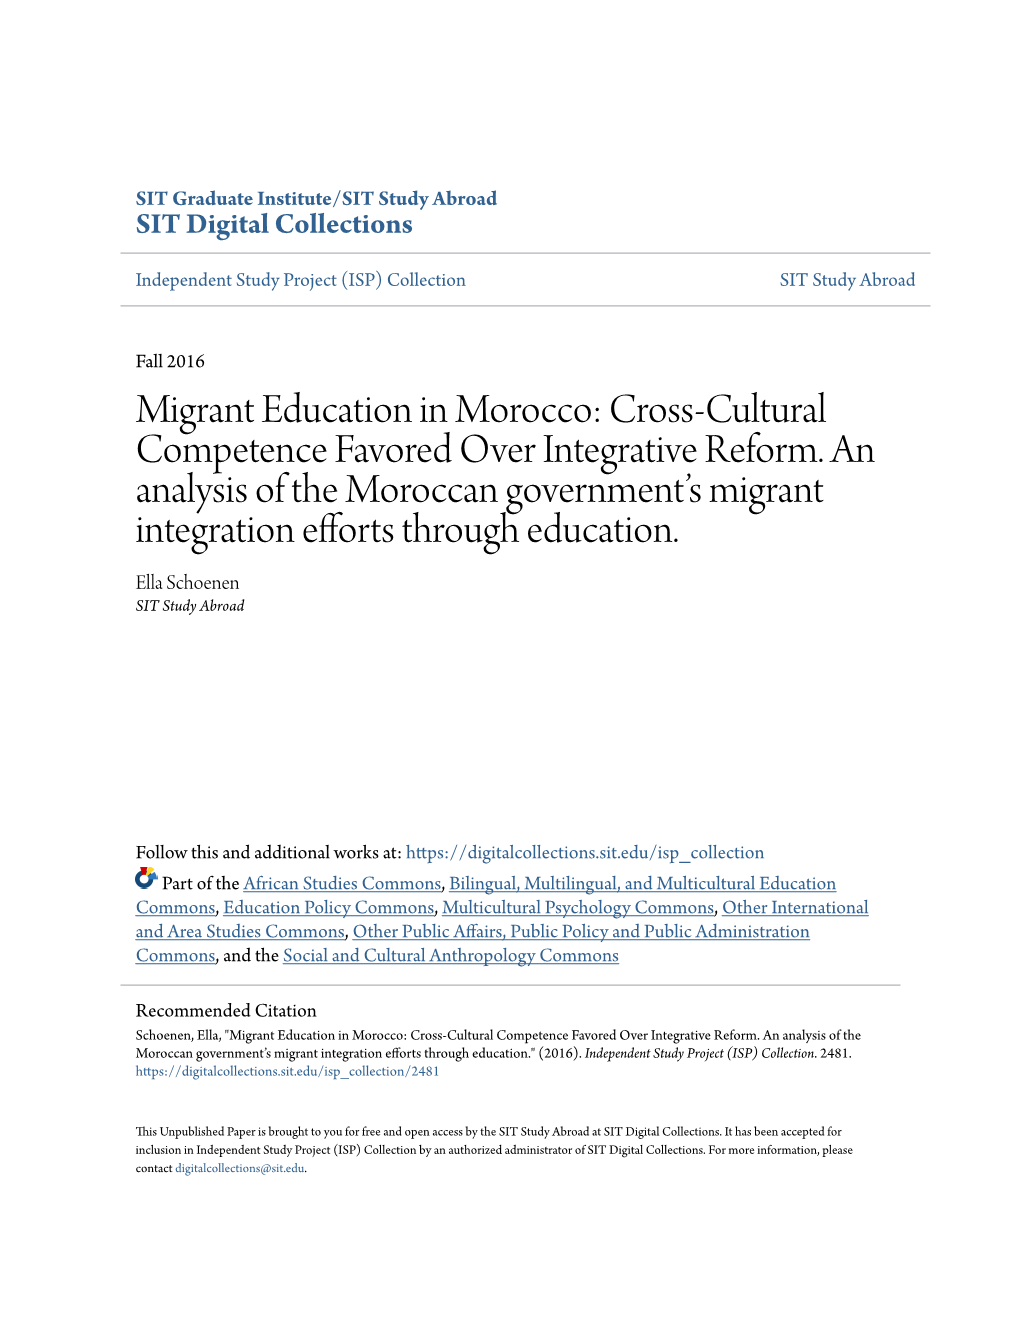 Migrant Education in Morocco: Cross-Cultural Competence Favored Over Integrative Reform